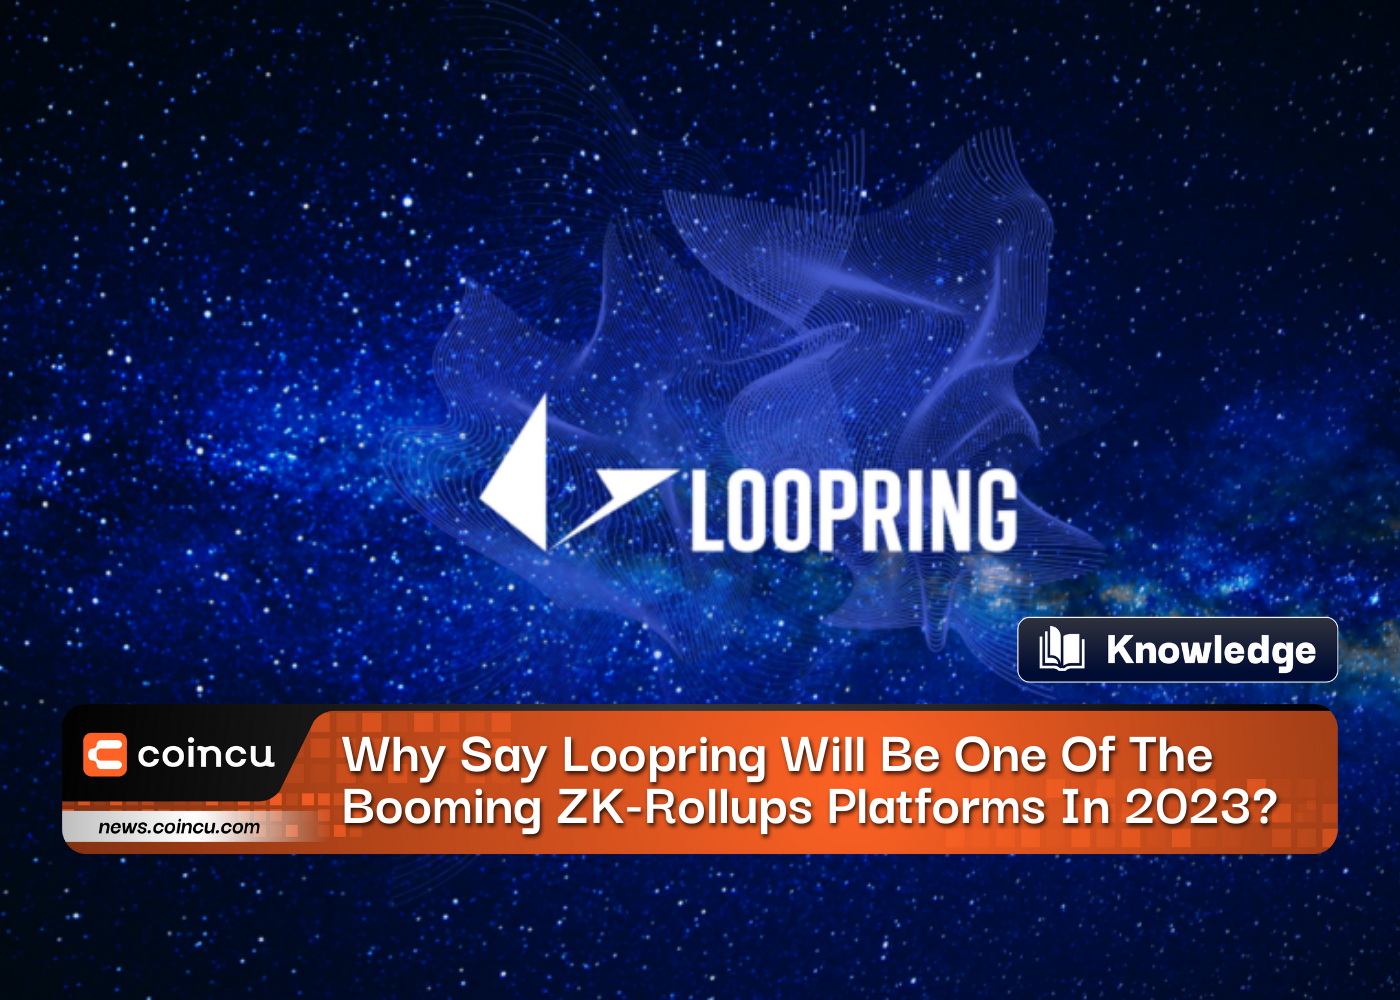 Why Say Loopring Will Be One Of The Booming ZK-Rollups Platforms In 2023?